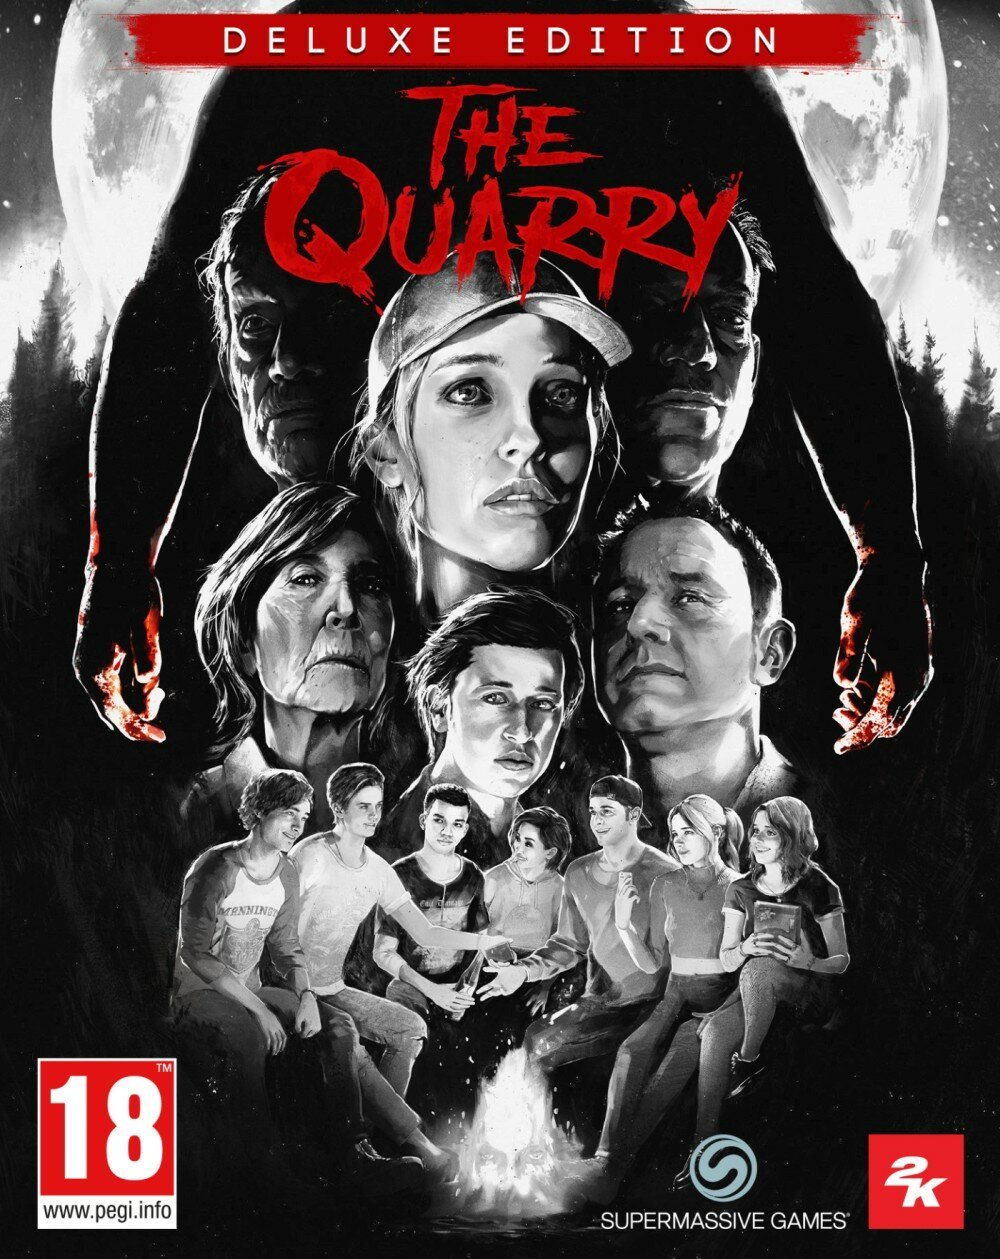 The Quarry Deluxe Edition - Steam